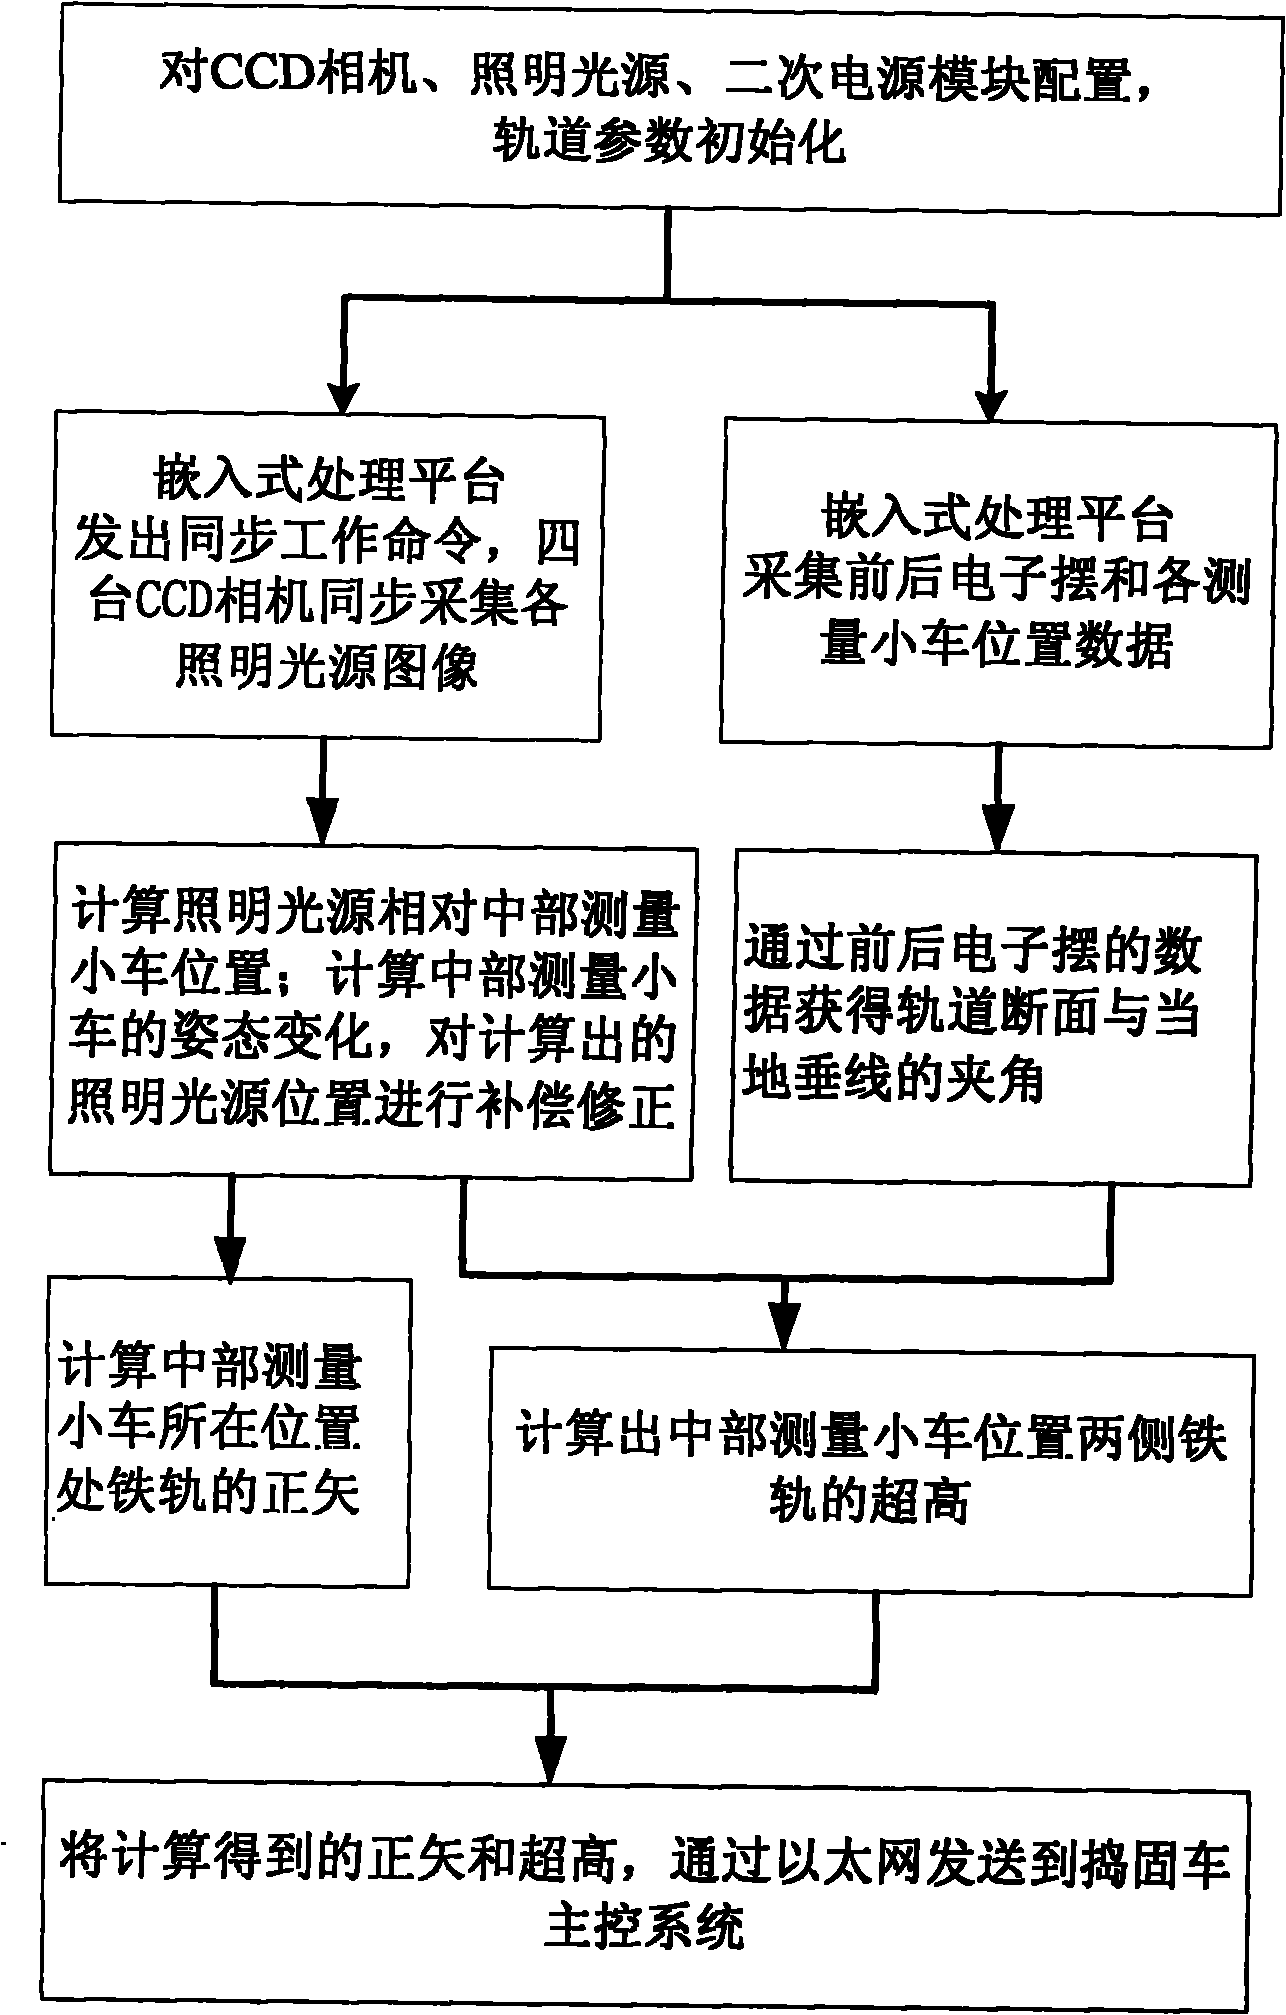 Tamping wagon photoelectric measurement system and method